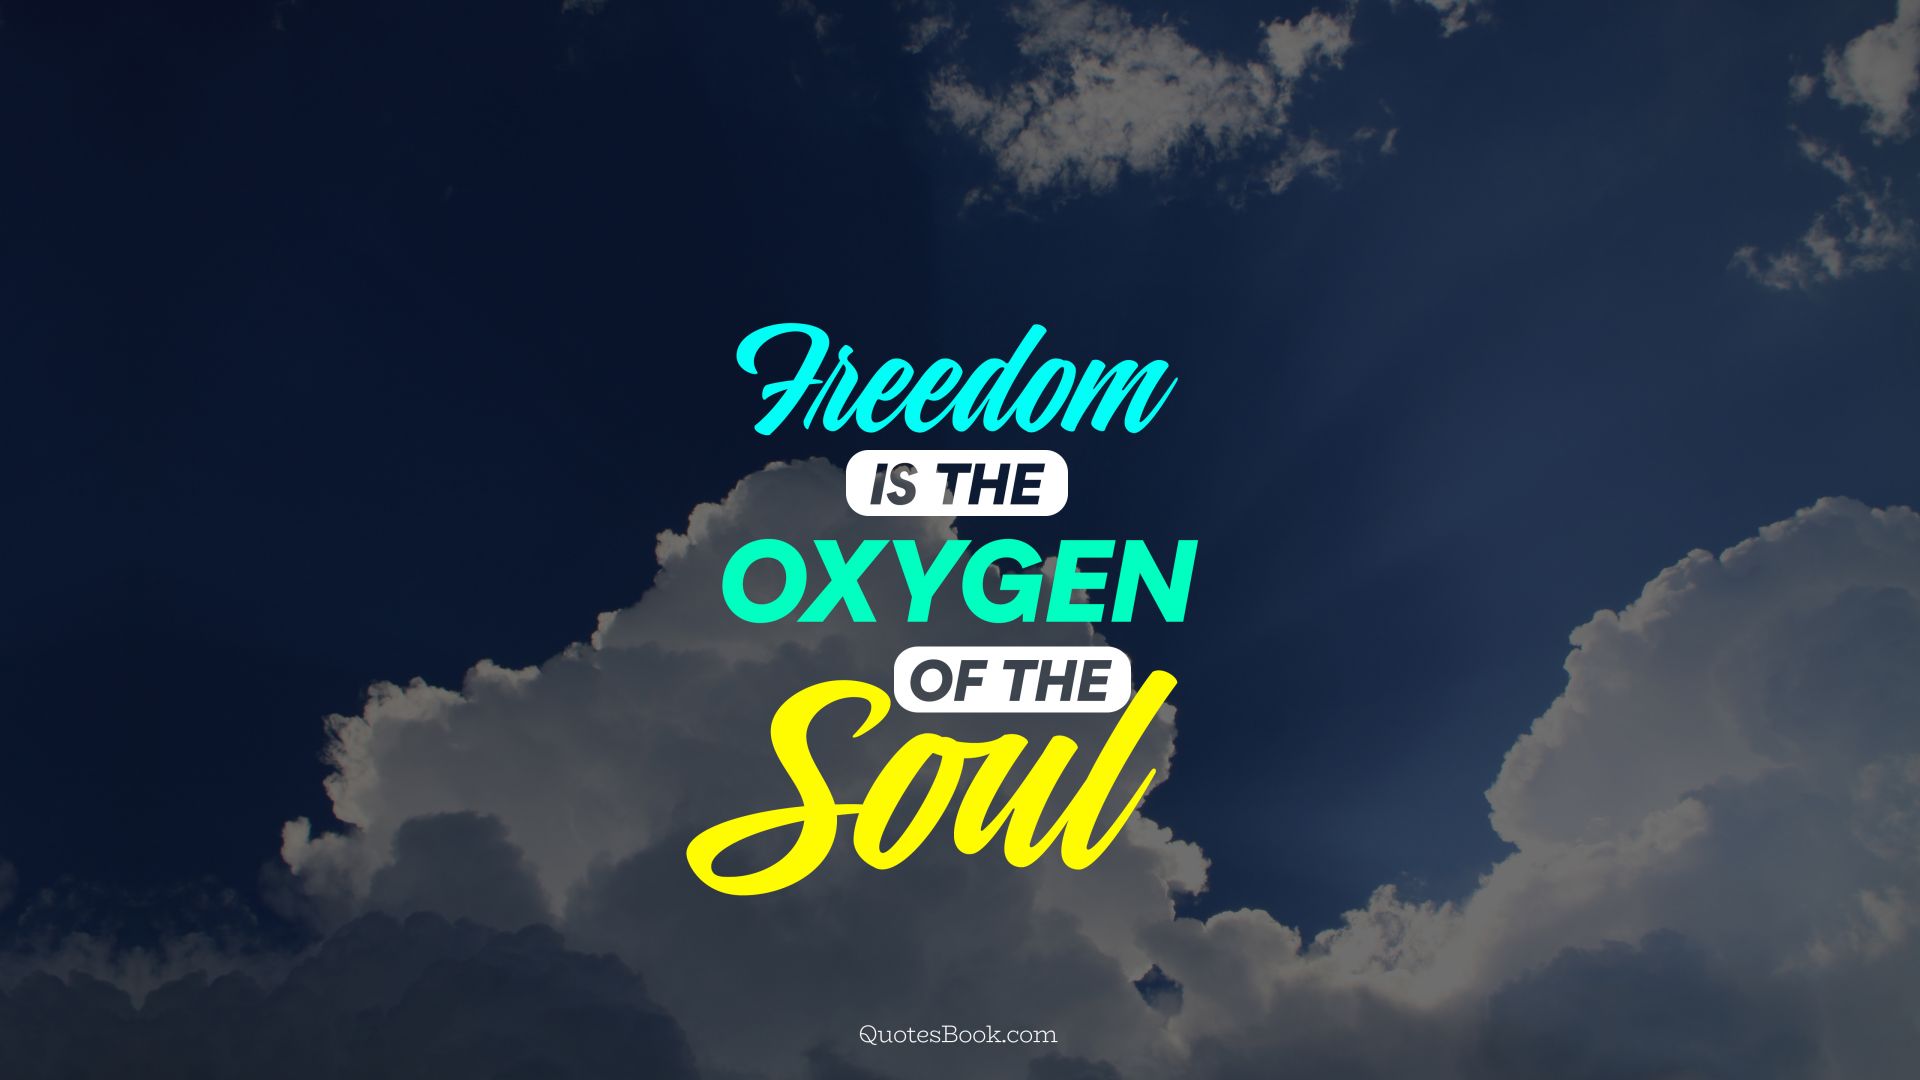 Freedom is the oxygen of the soul